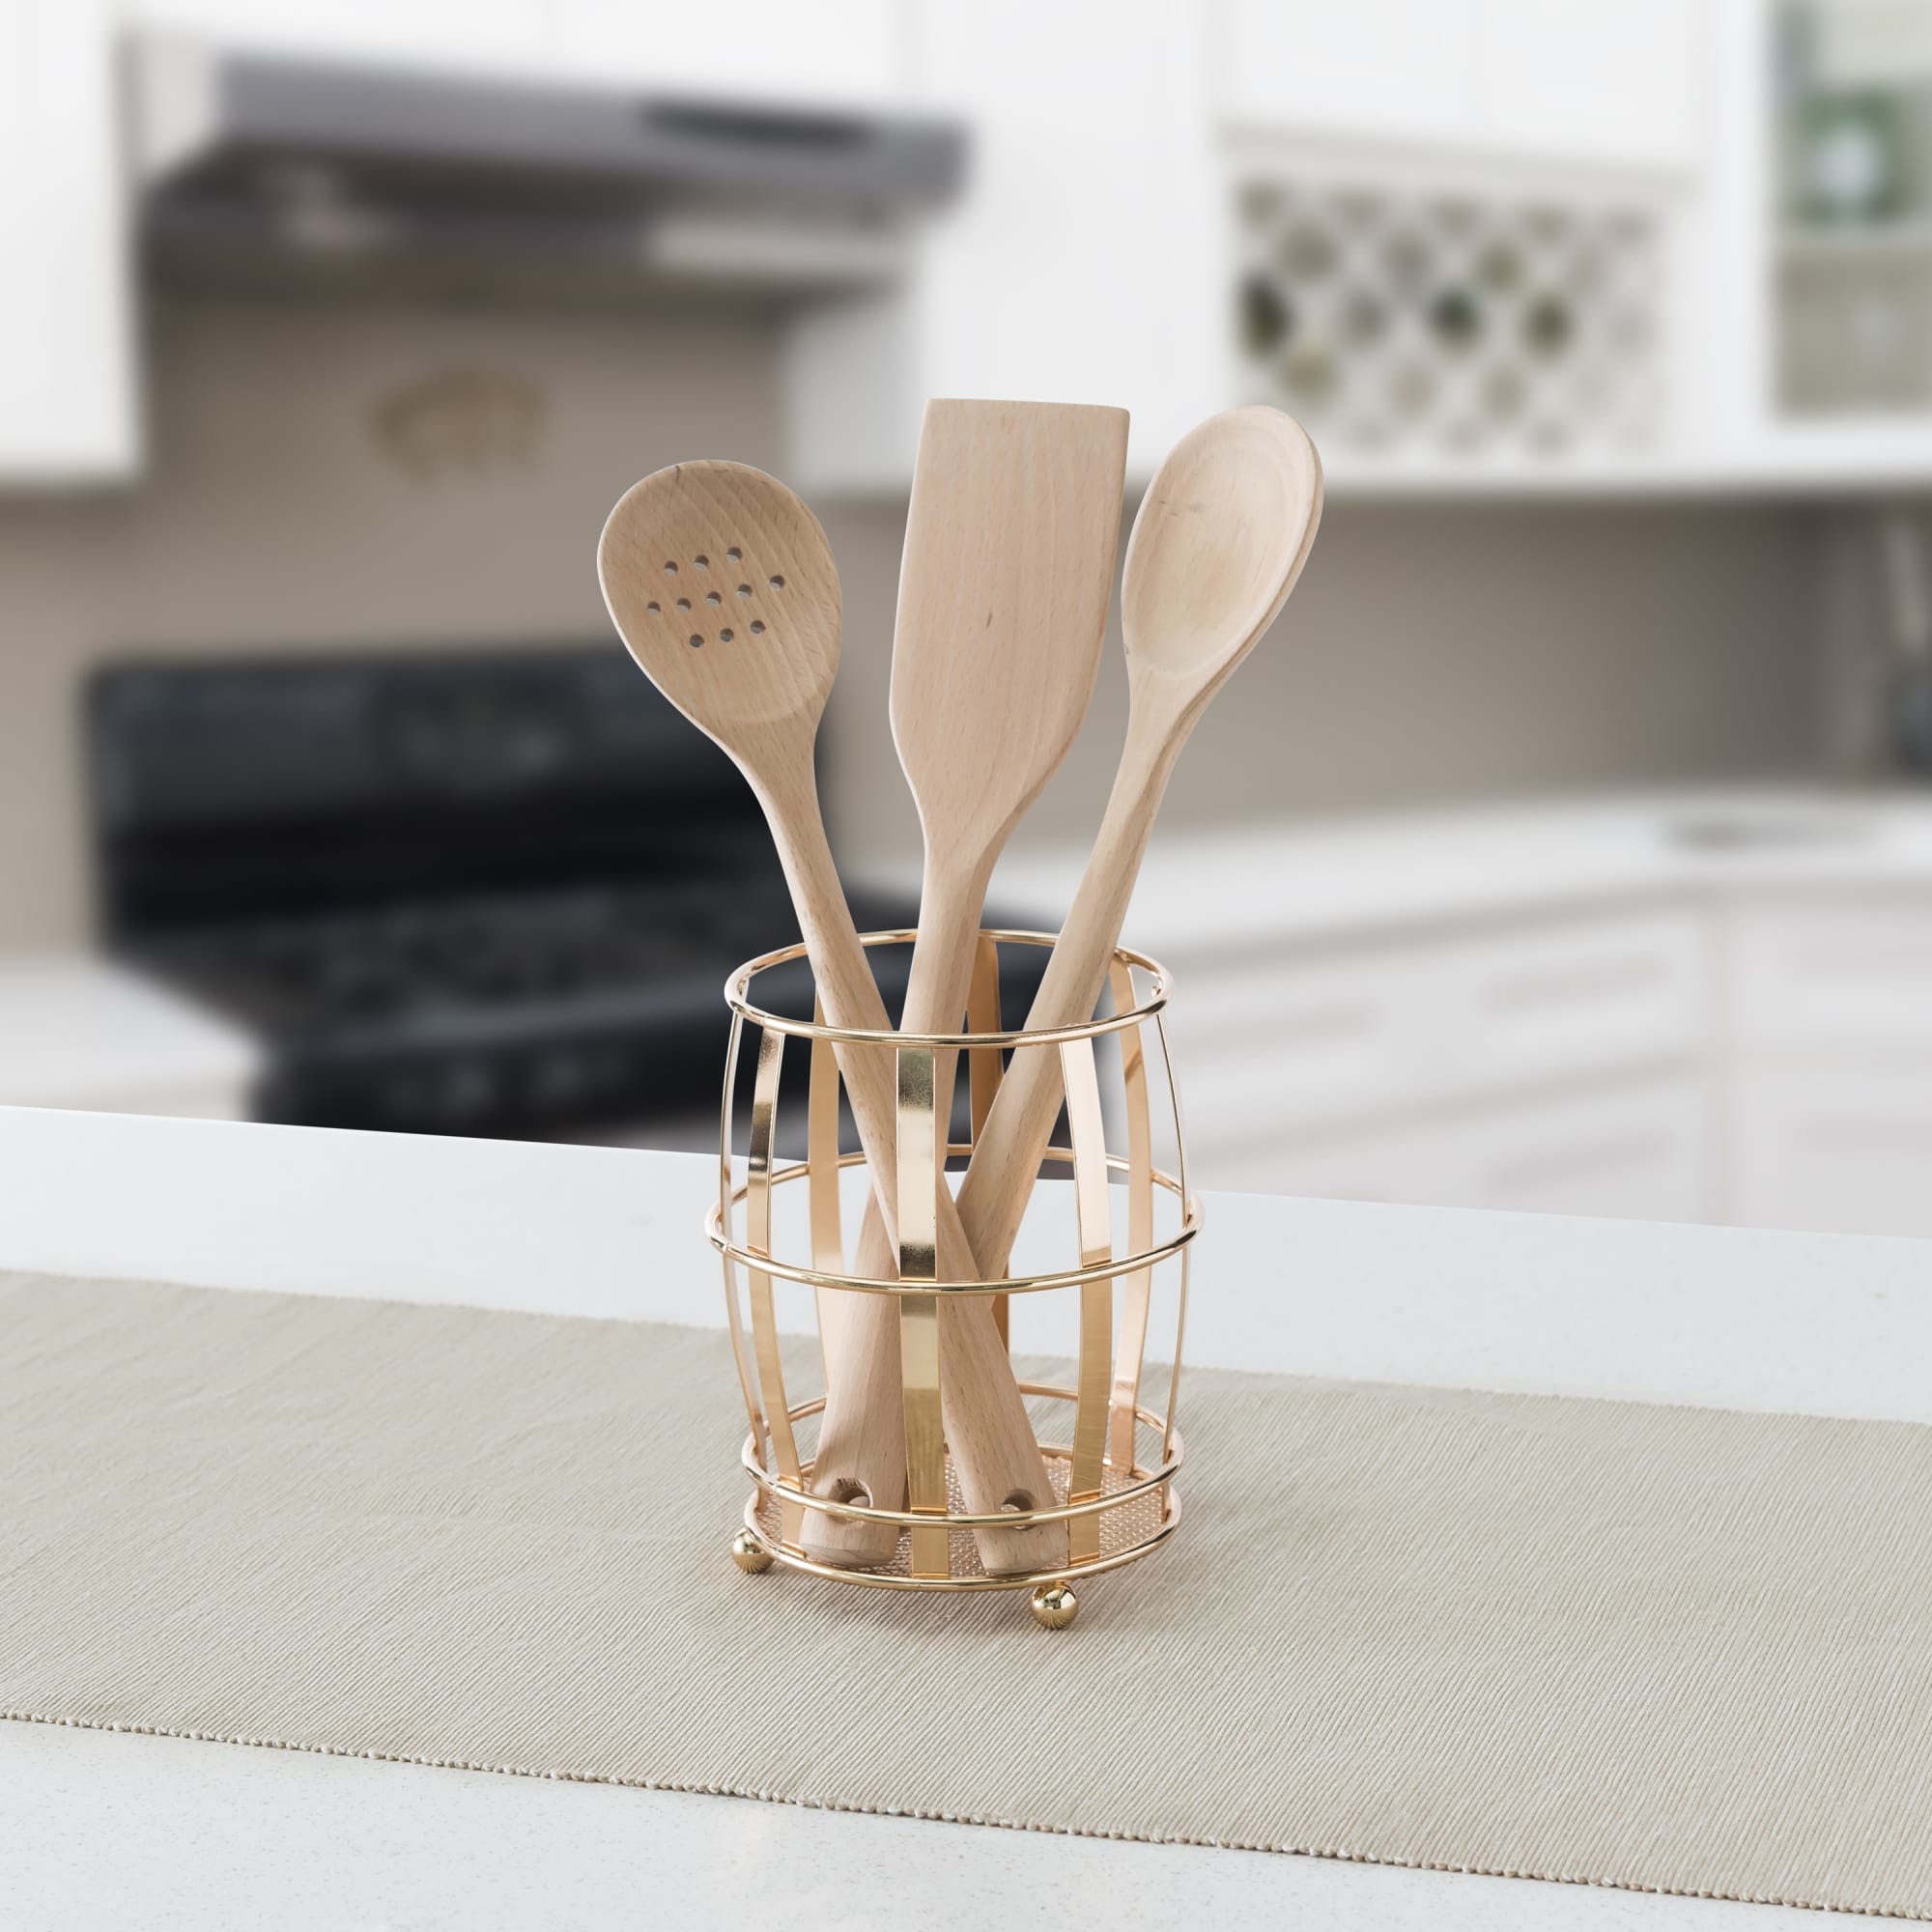 Home Basics Lyon Cutlery Holder with Mesh Bottom and Non-Skid Feet, Rose Gold $6.00 EACH, CASE PACK OF 12